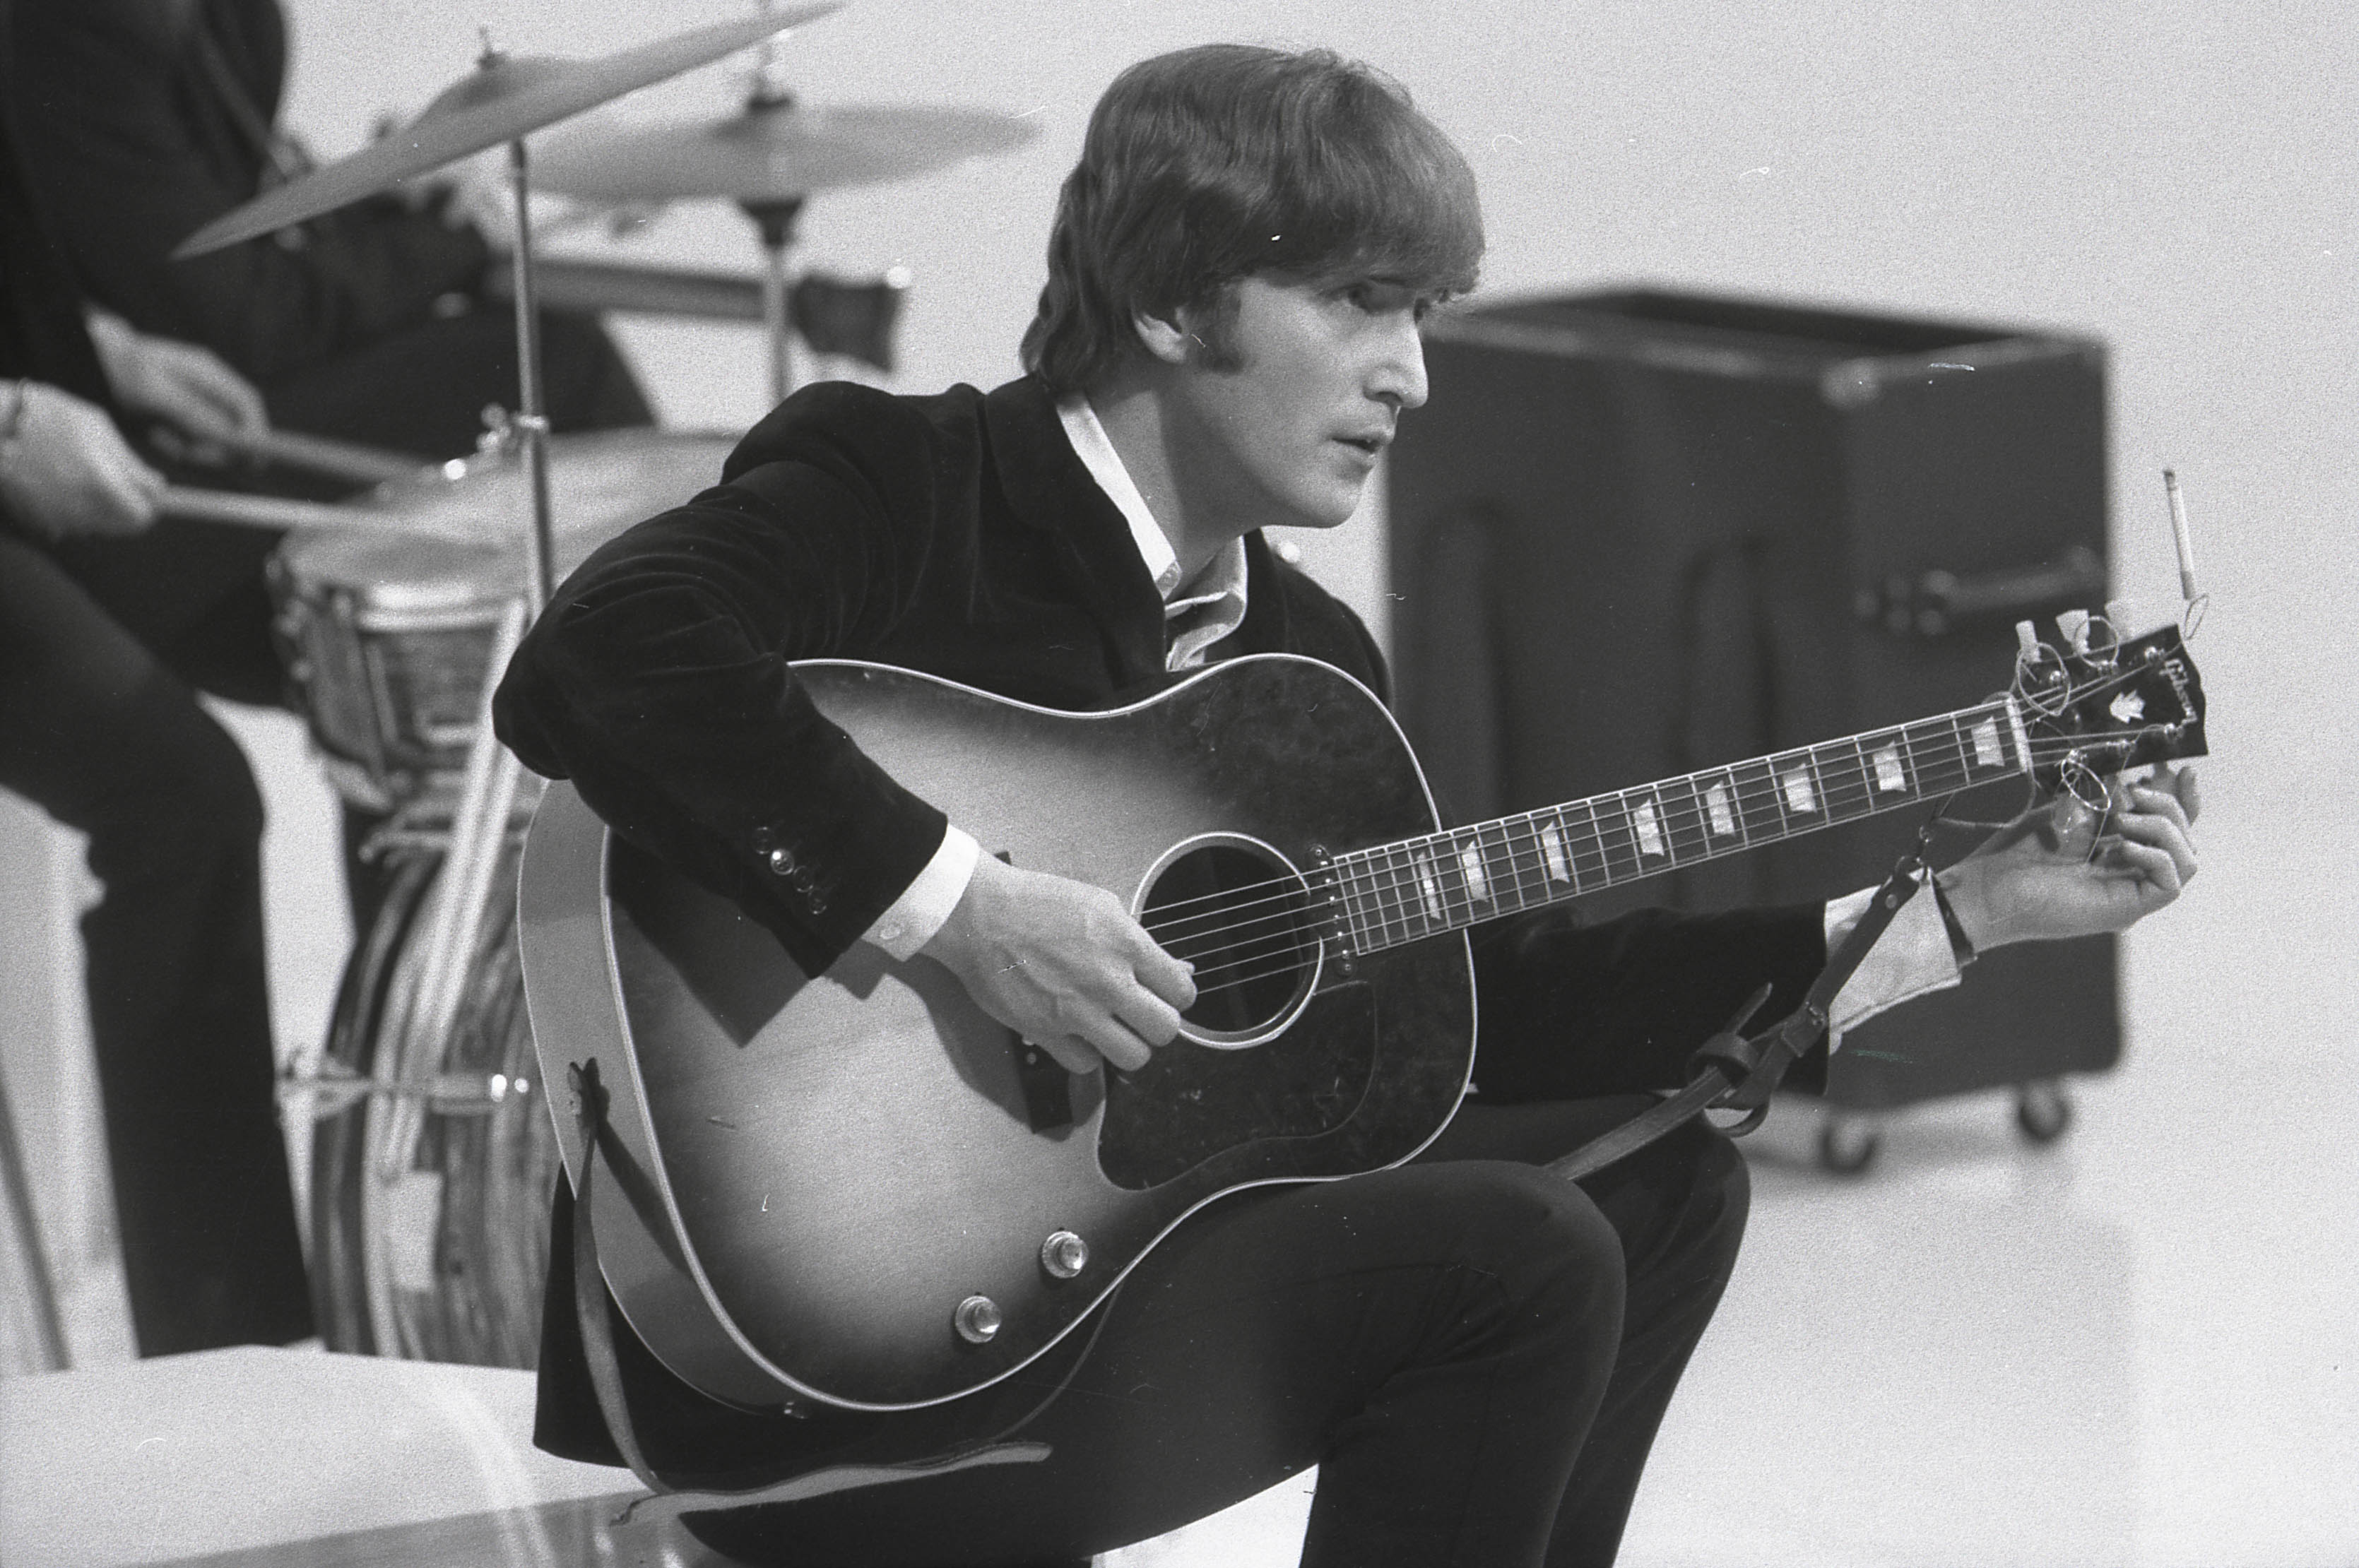 John Lennon Said the Original Version of The Beatles’ ‘In My Life’ Was ‘Ridiculous’